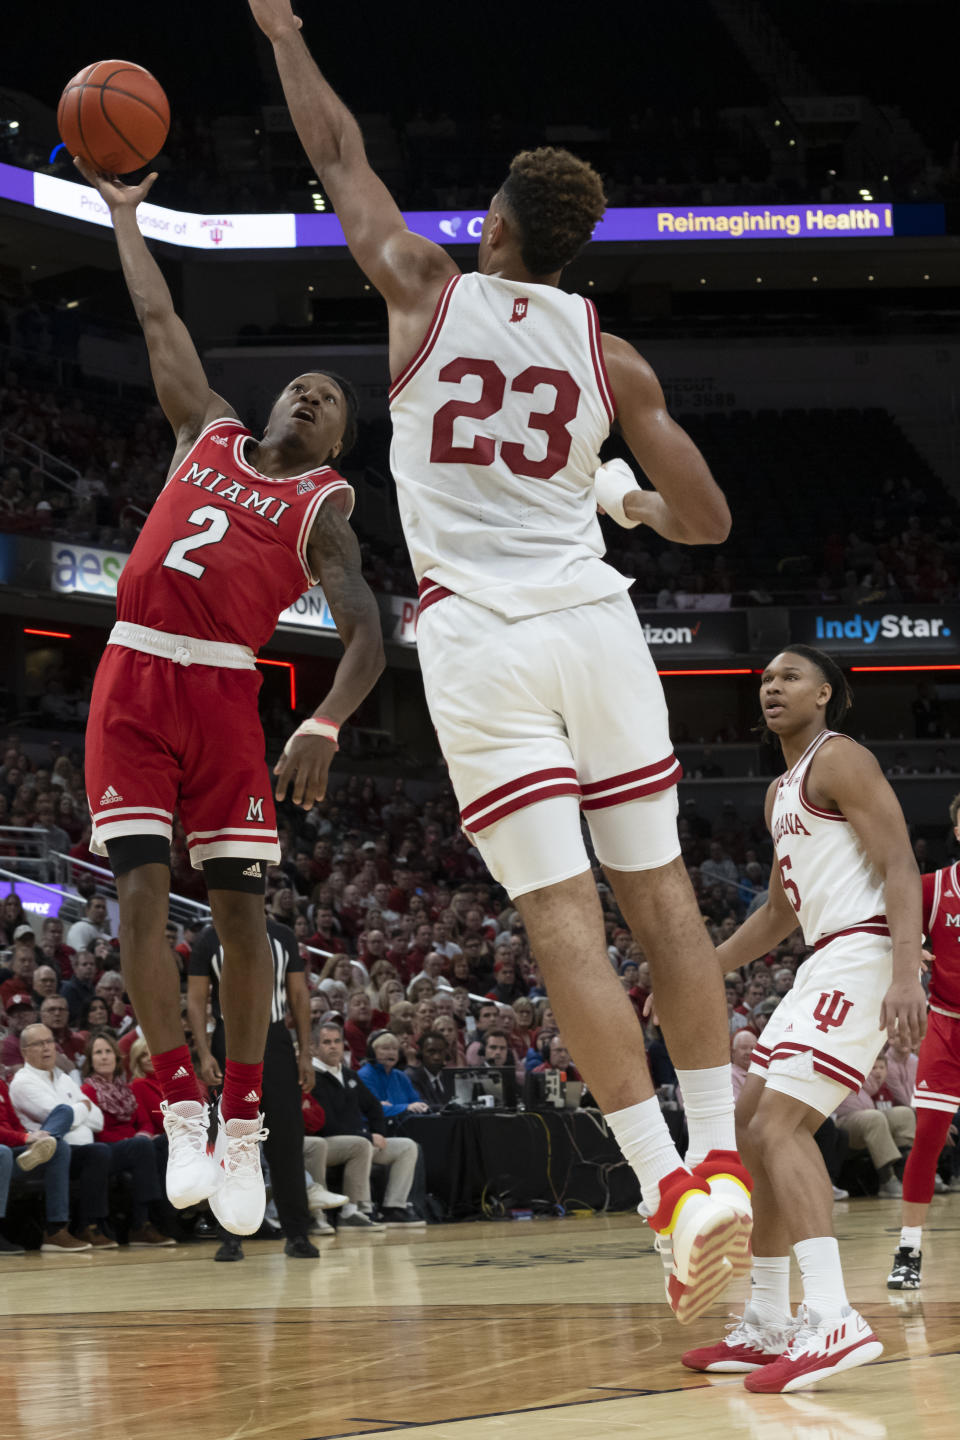 Miami (Ohio) guard Mekhi Lairy (2) shoots the ball over Indiana forward Trayce Jackson-Davis (23) during the first half of an NCAA college basketball game, Sunday, Nov. 20, 2022, in Indianapolis. (AP Photo/Marc Lebryk)